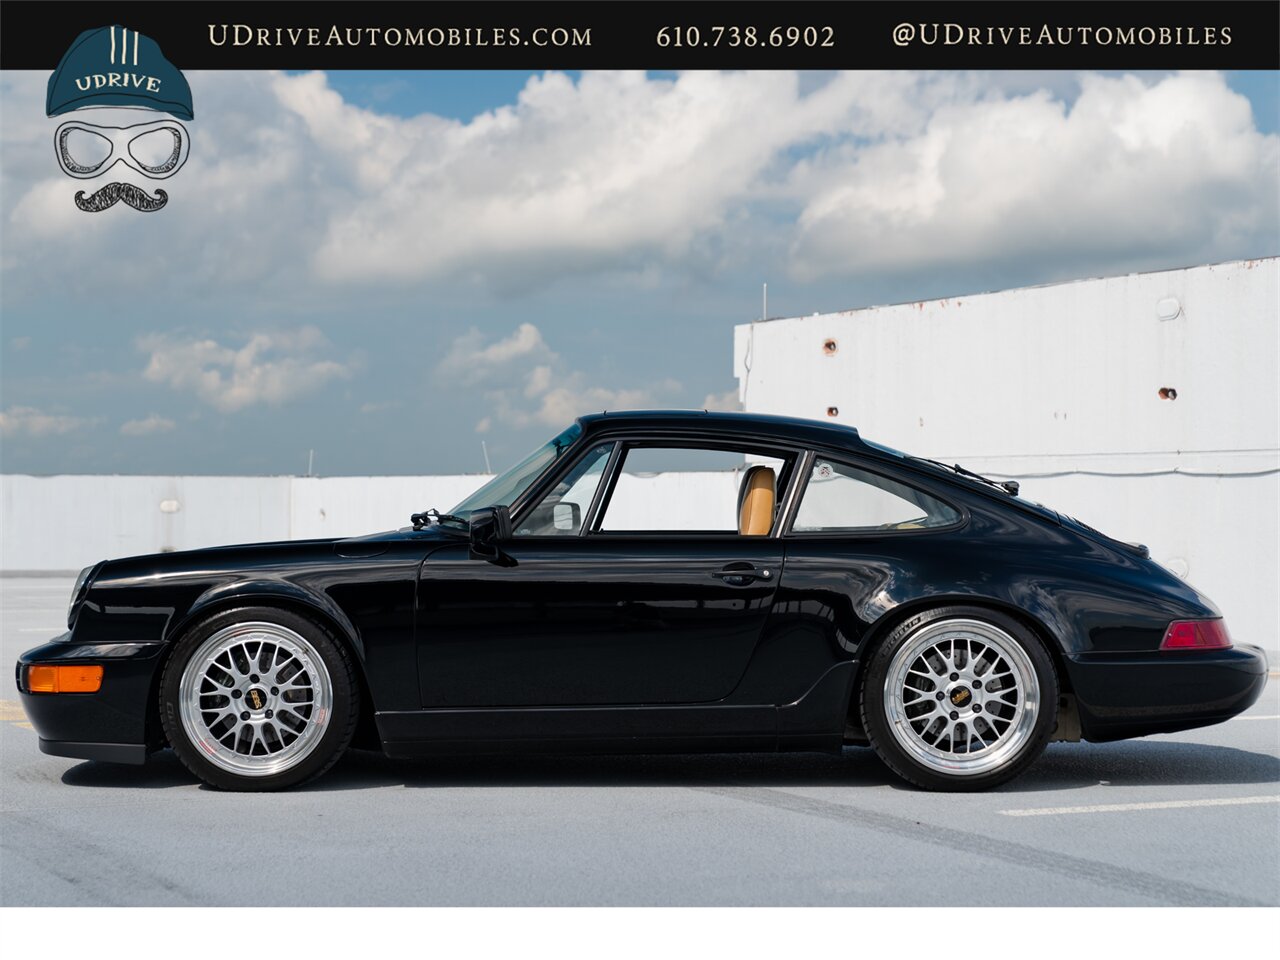 1989 Porsche 911 Carrera 4  964 C4 5 Speed Manual $63k Recent Service and Upgrades - Photo 13 - West Chester, PA 19382